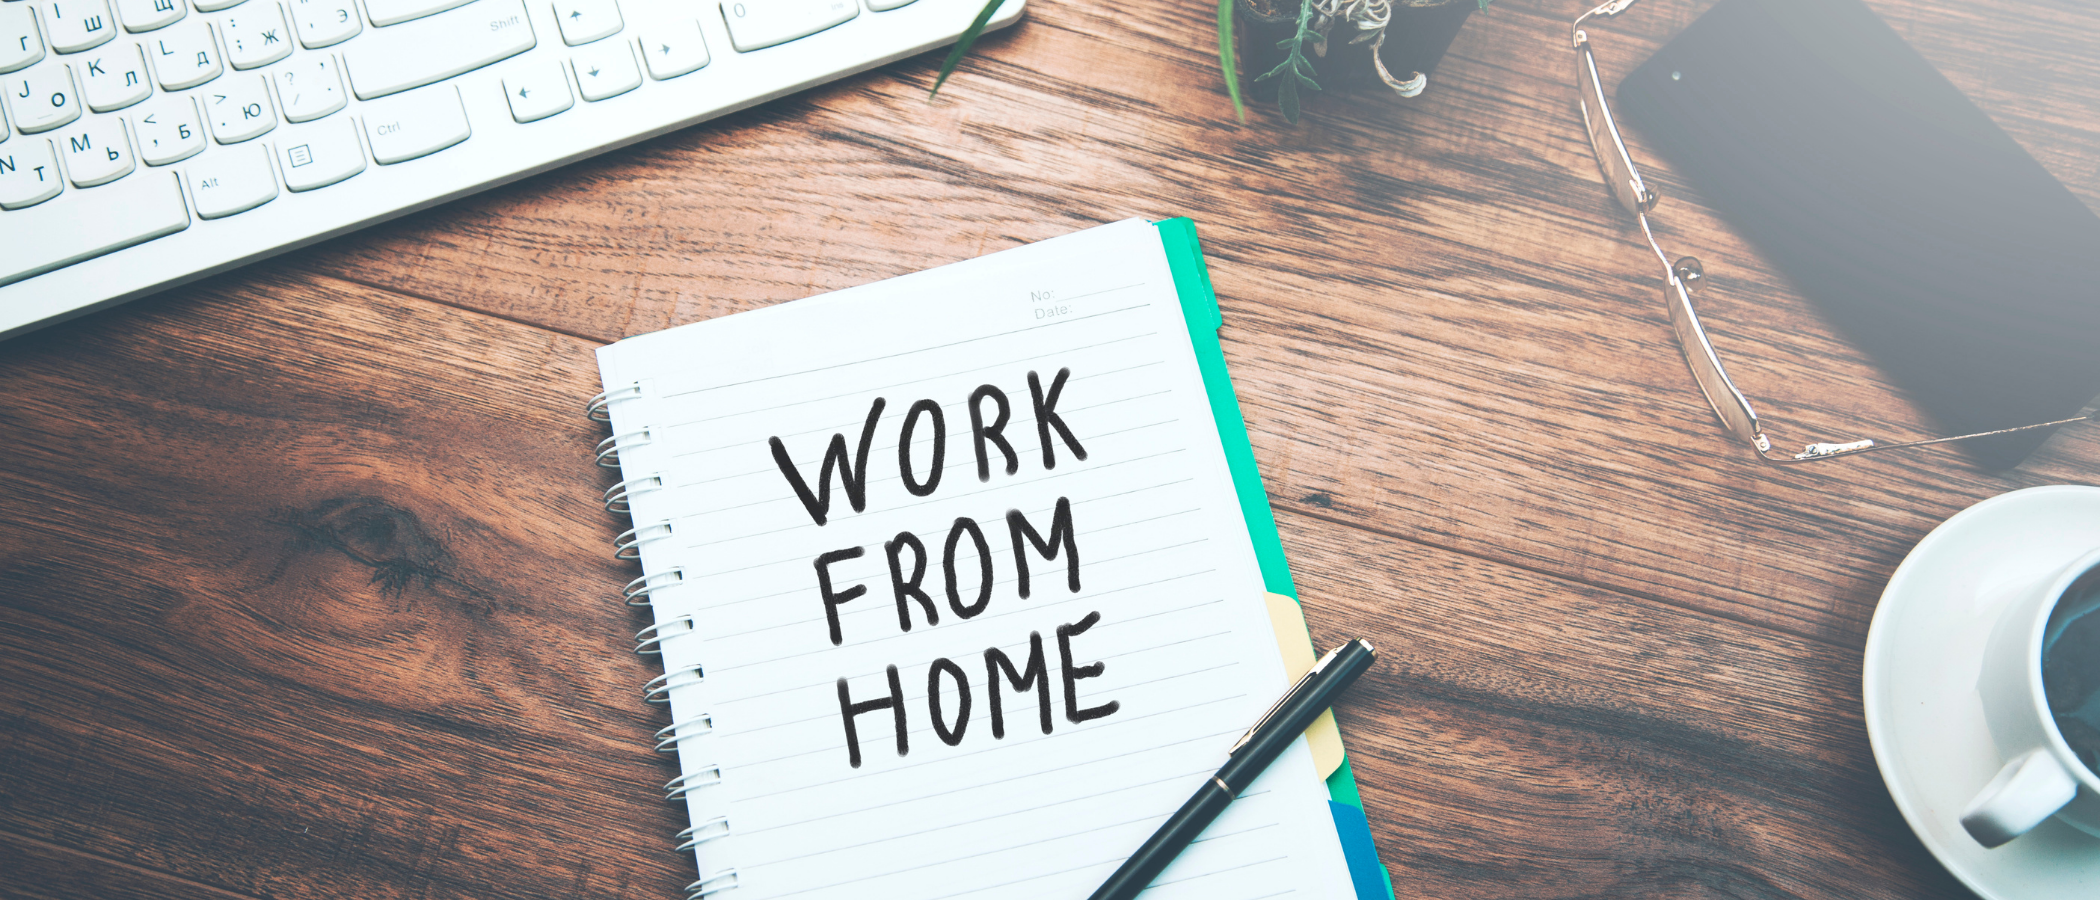 A note illustrating the words “work from home” on a notepad on a wooden desk